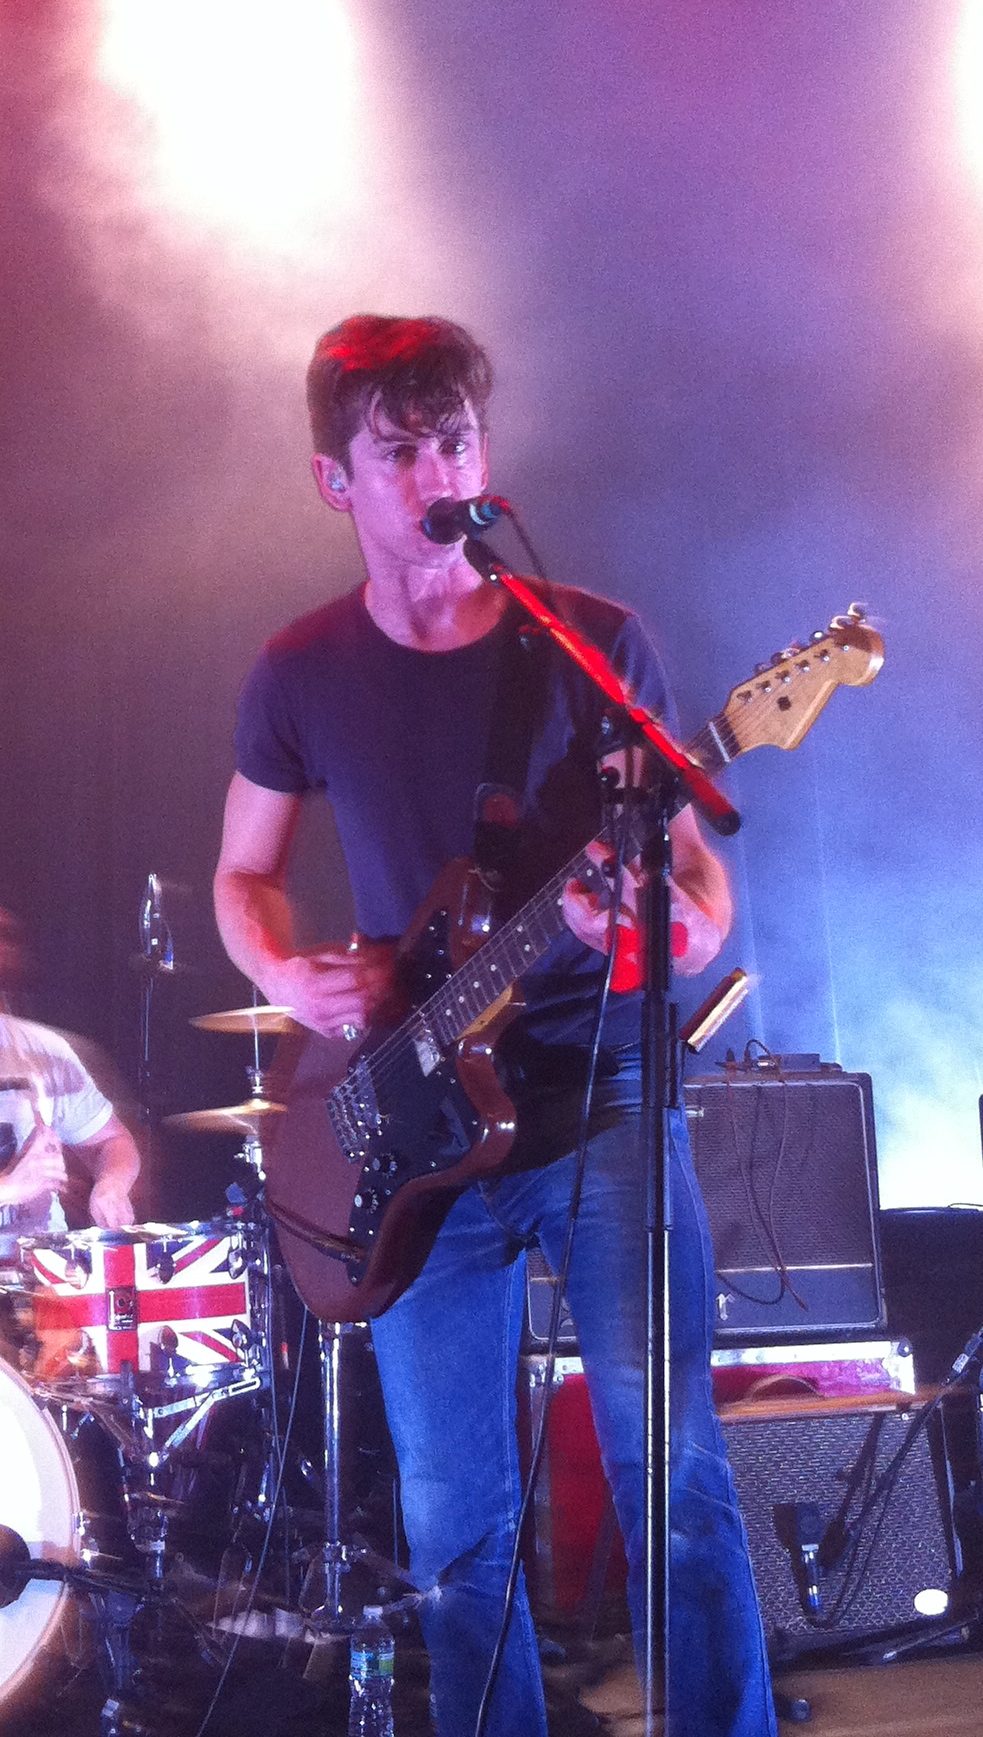 File:Alex Turner Performing with Arctic Monkeys.jpg - Wikimedia Commons